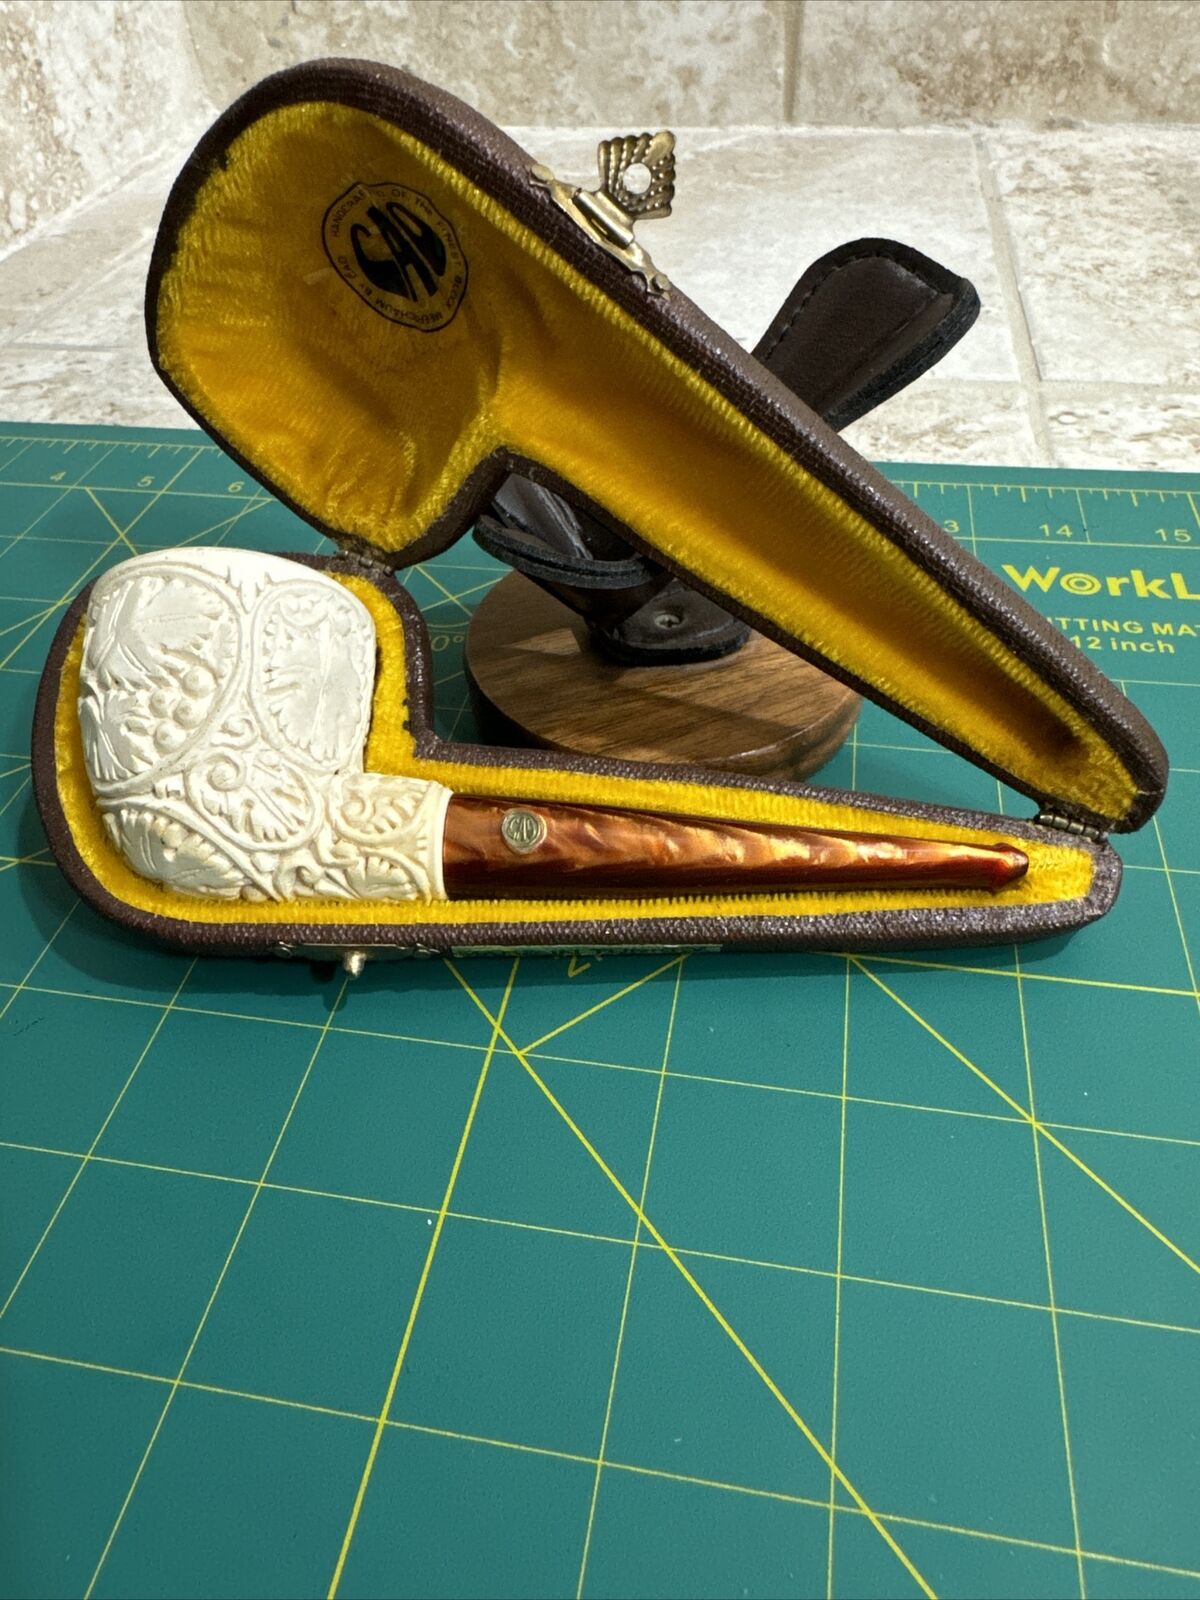 CAO Meerschaum Tobacco Pipe Great Condition Vintage Ornate Carving